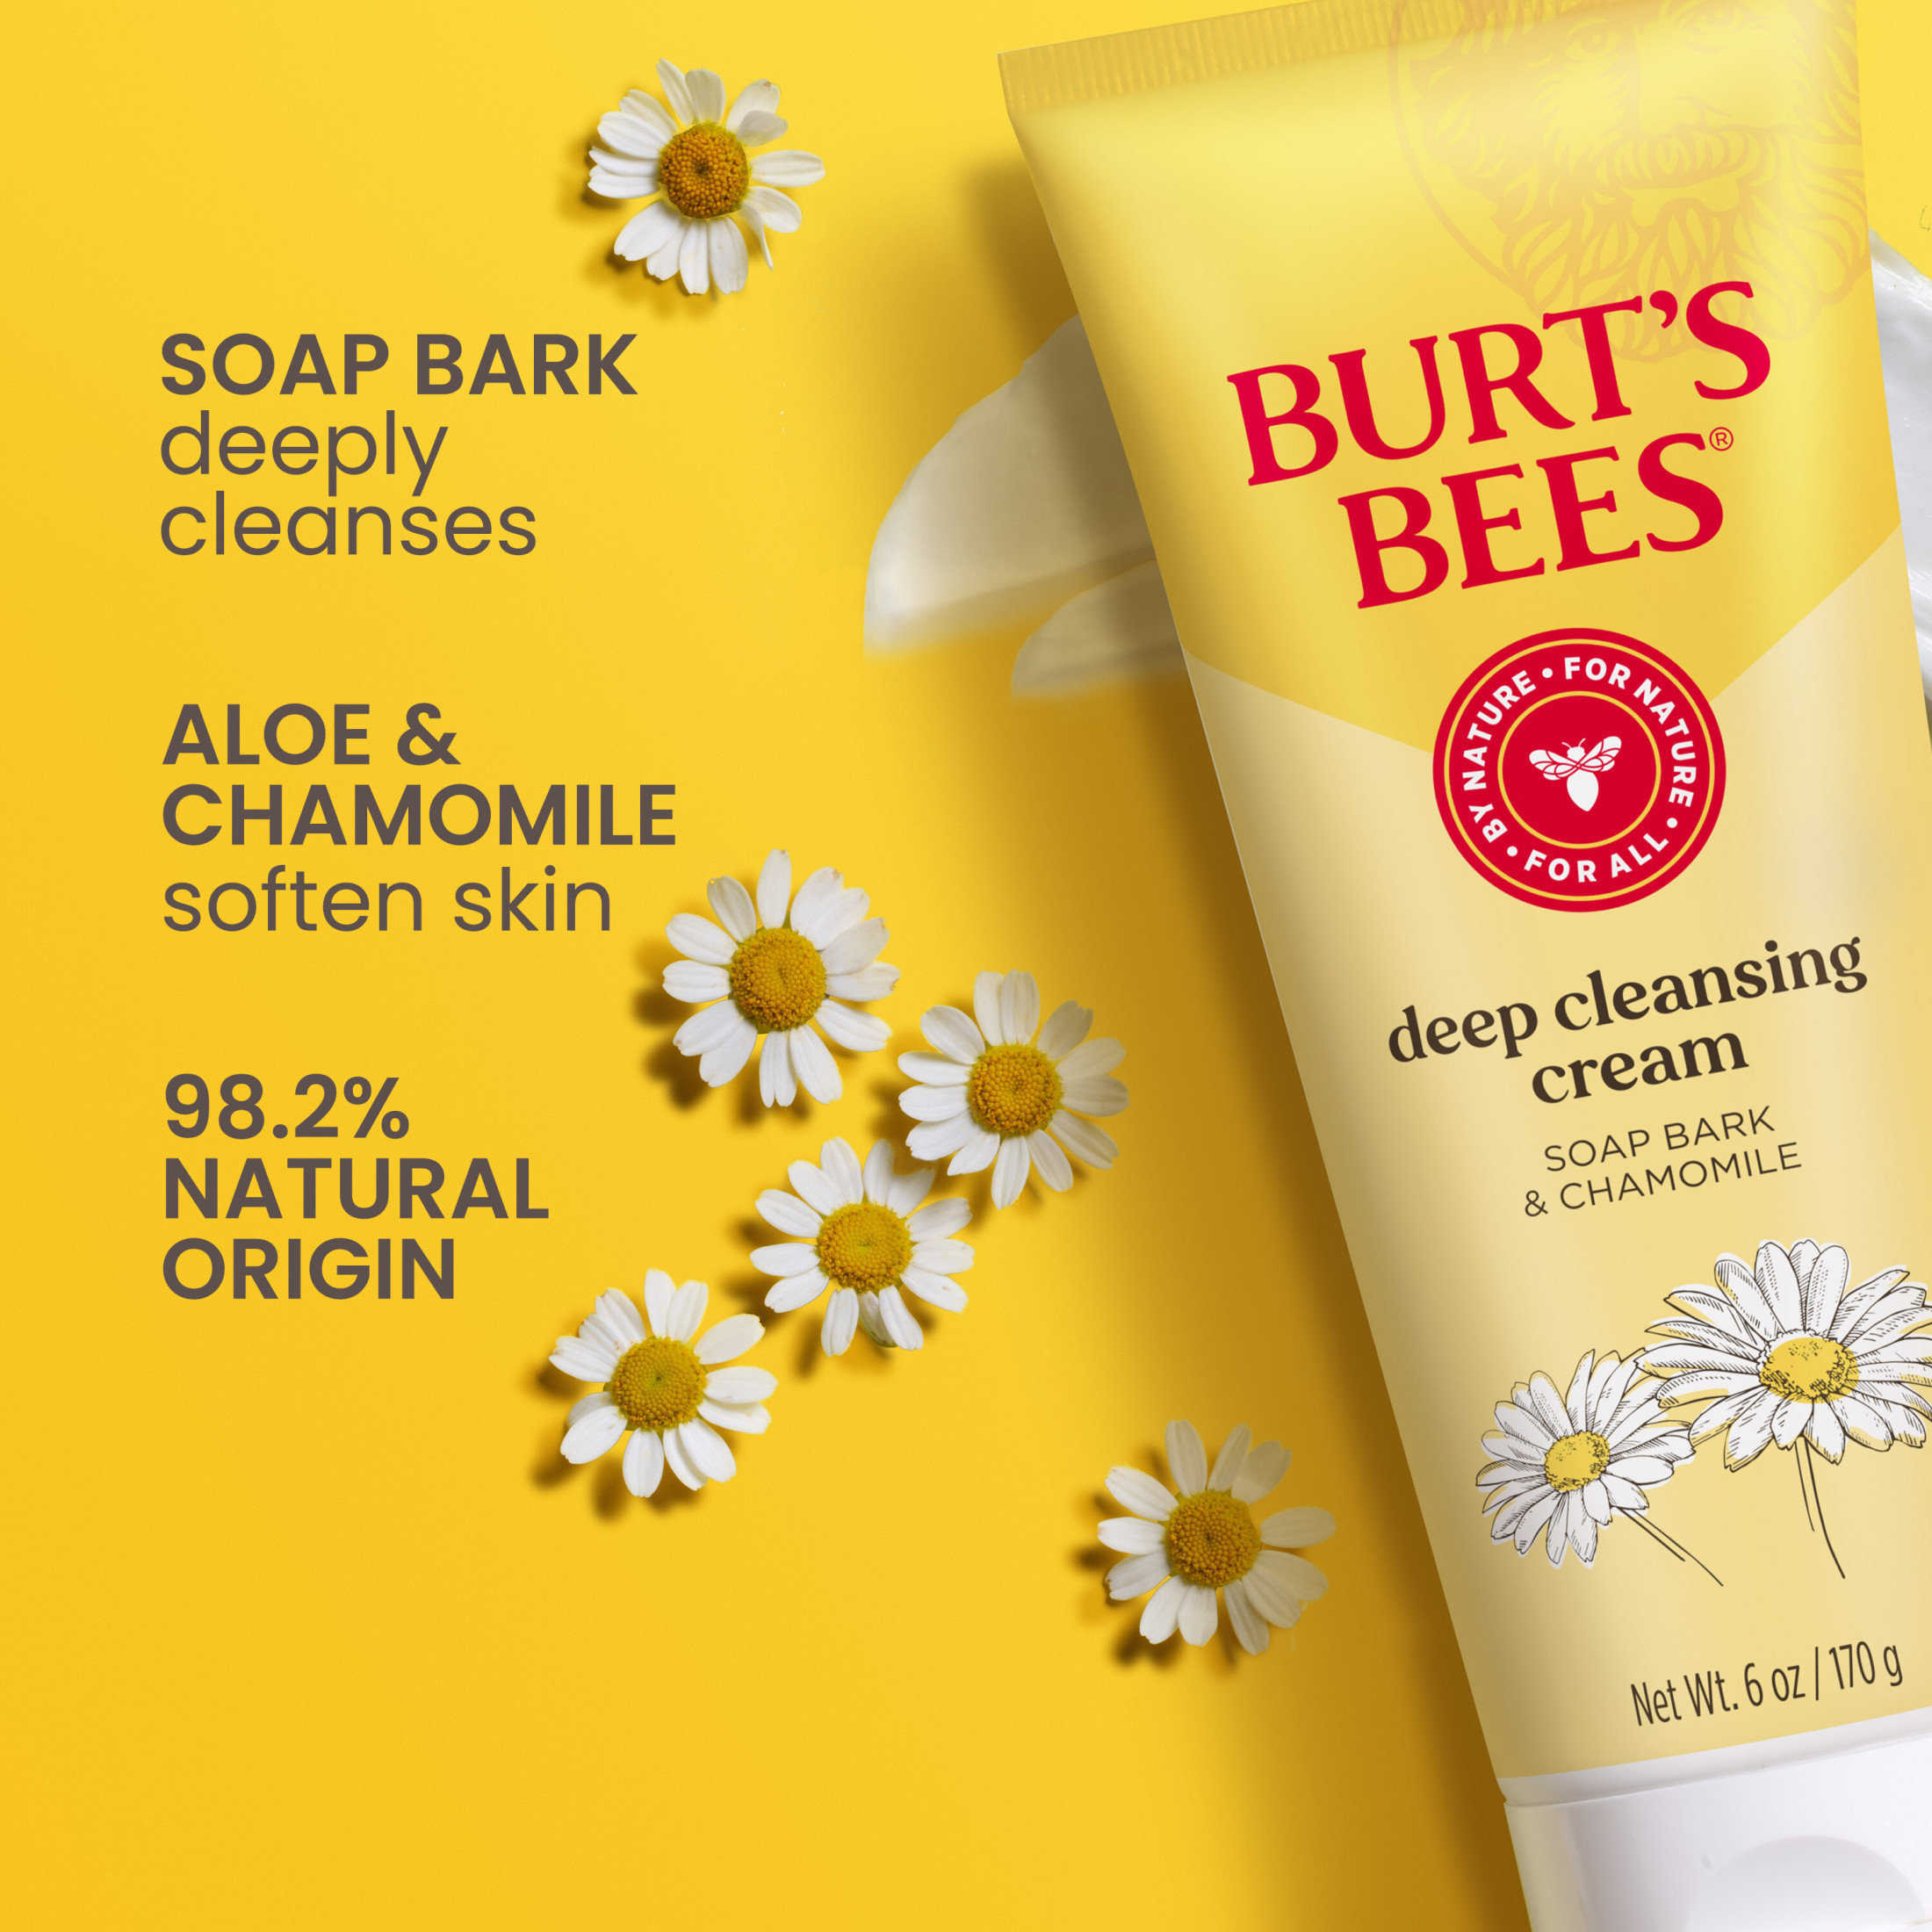 Burt's Bees Deep Cleansing Cream with Soap Bark and Chamomile, 6 Ounces - image 5 of 15